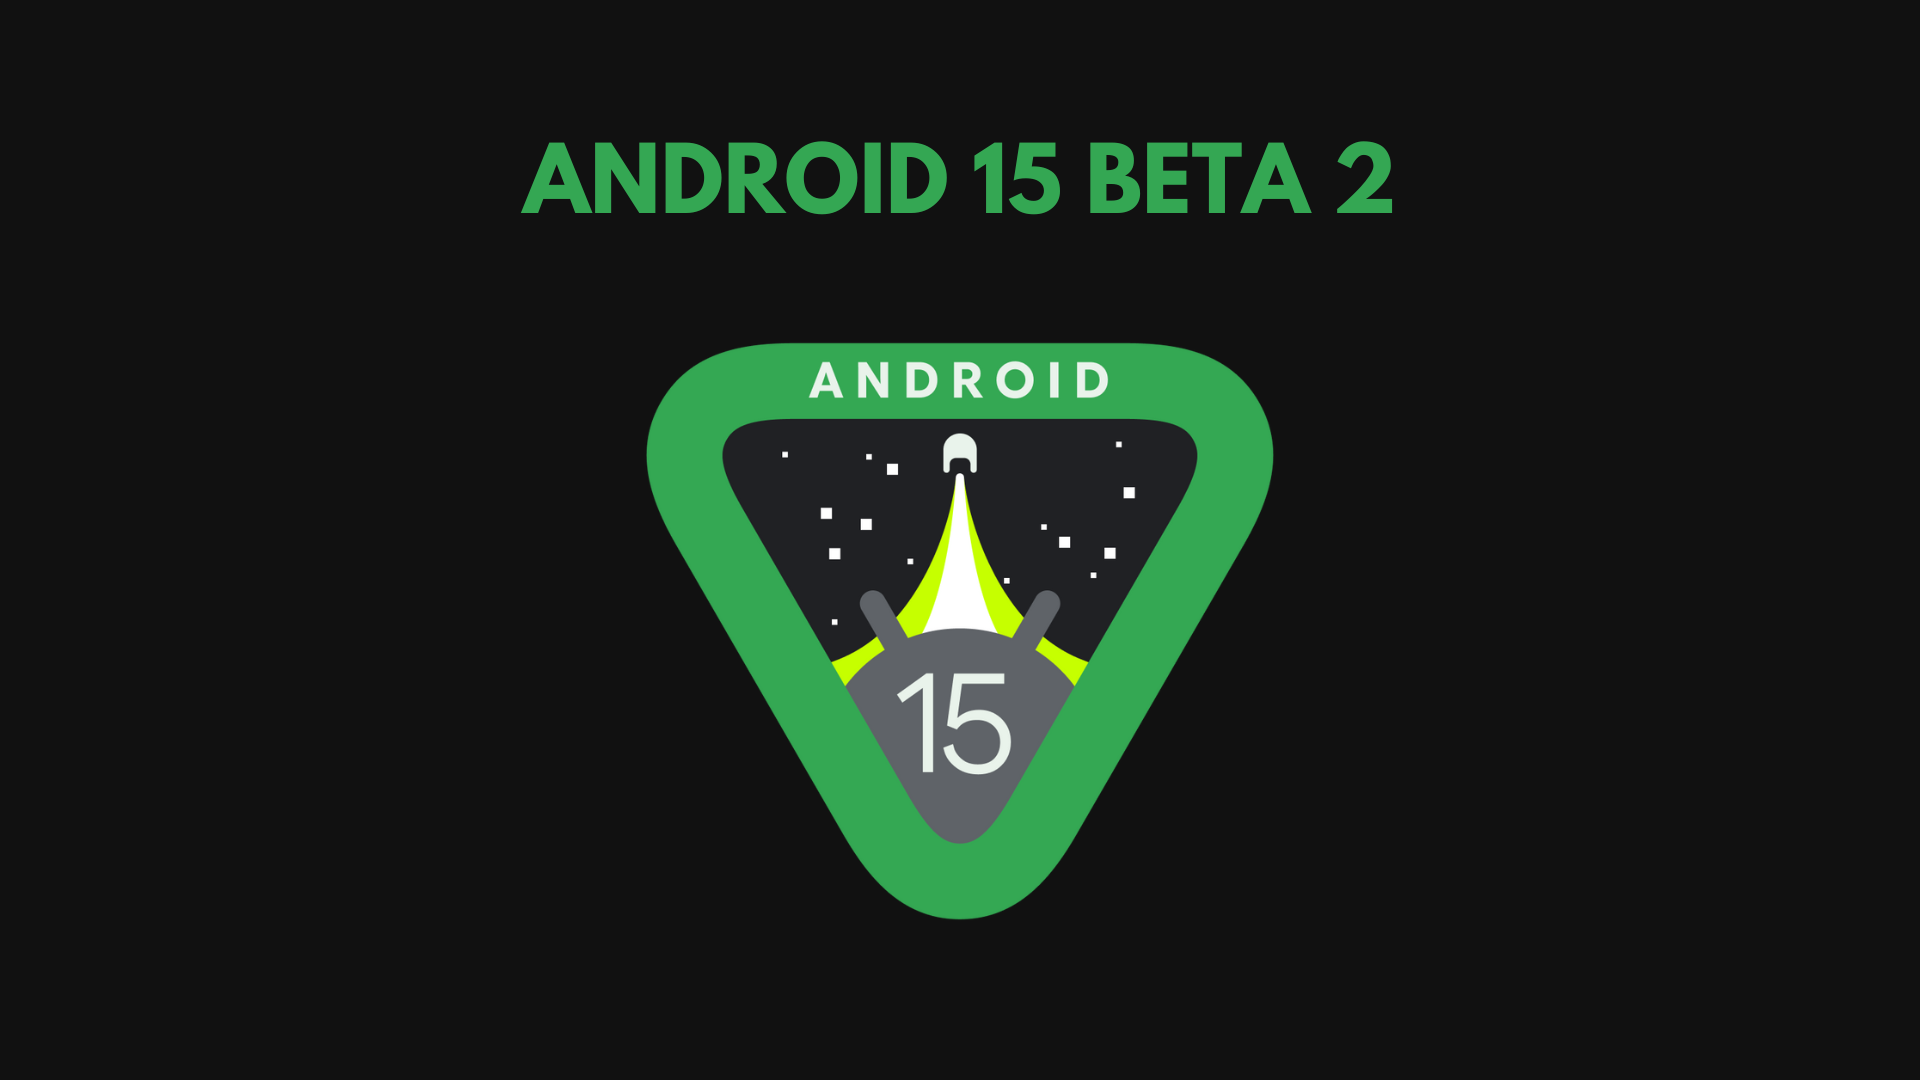 All New Things and Updates in Android 15 Beta 2